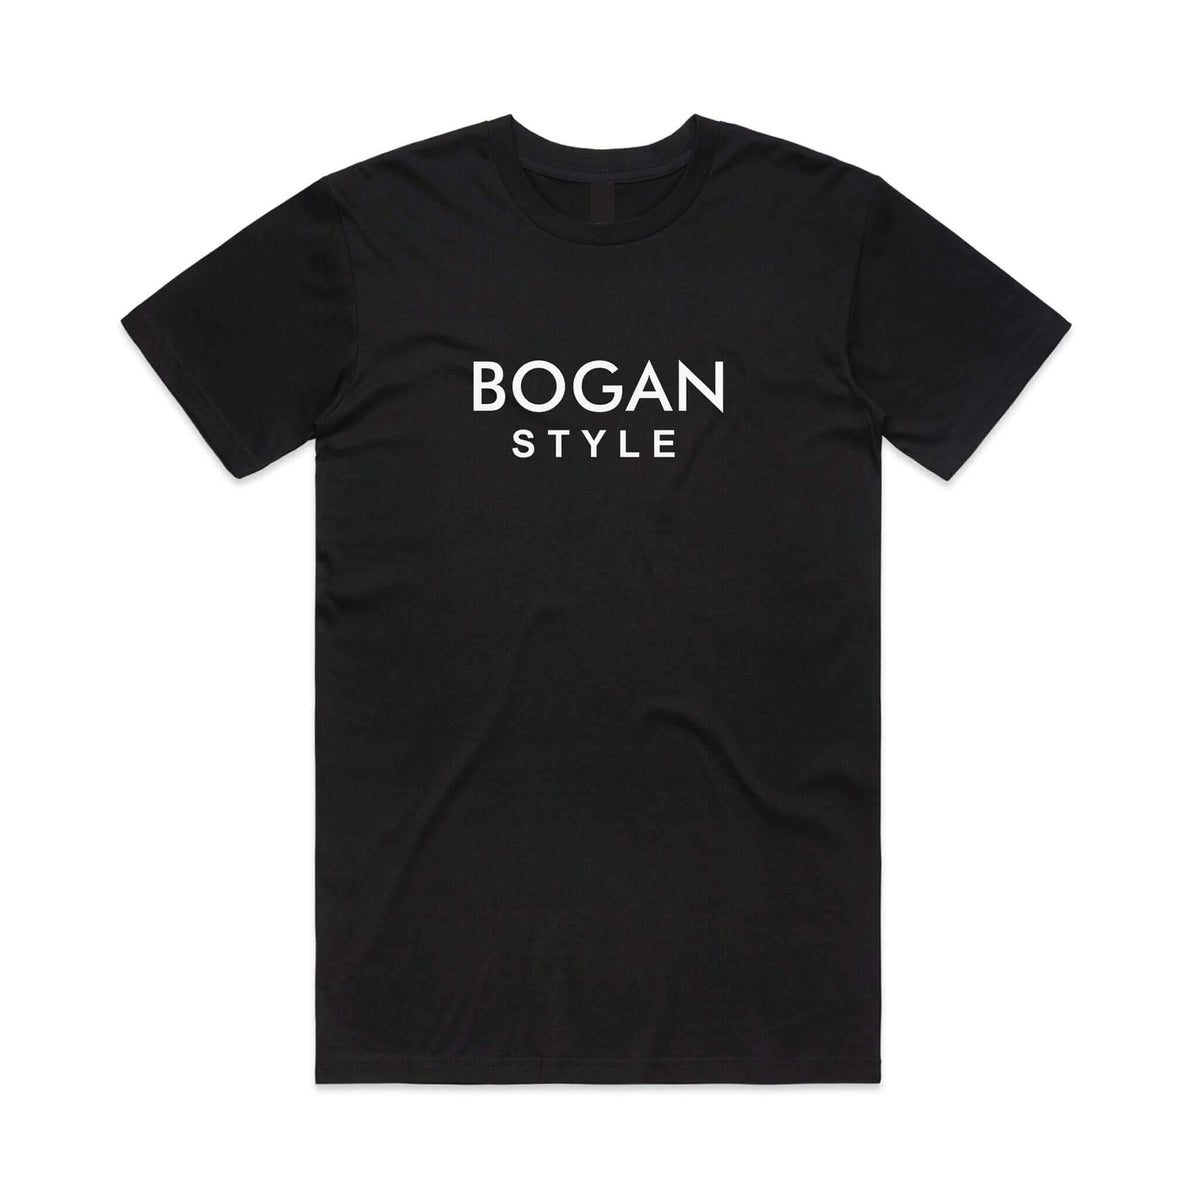 Mens black shirt with Bogan Style printed on the front